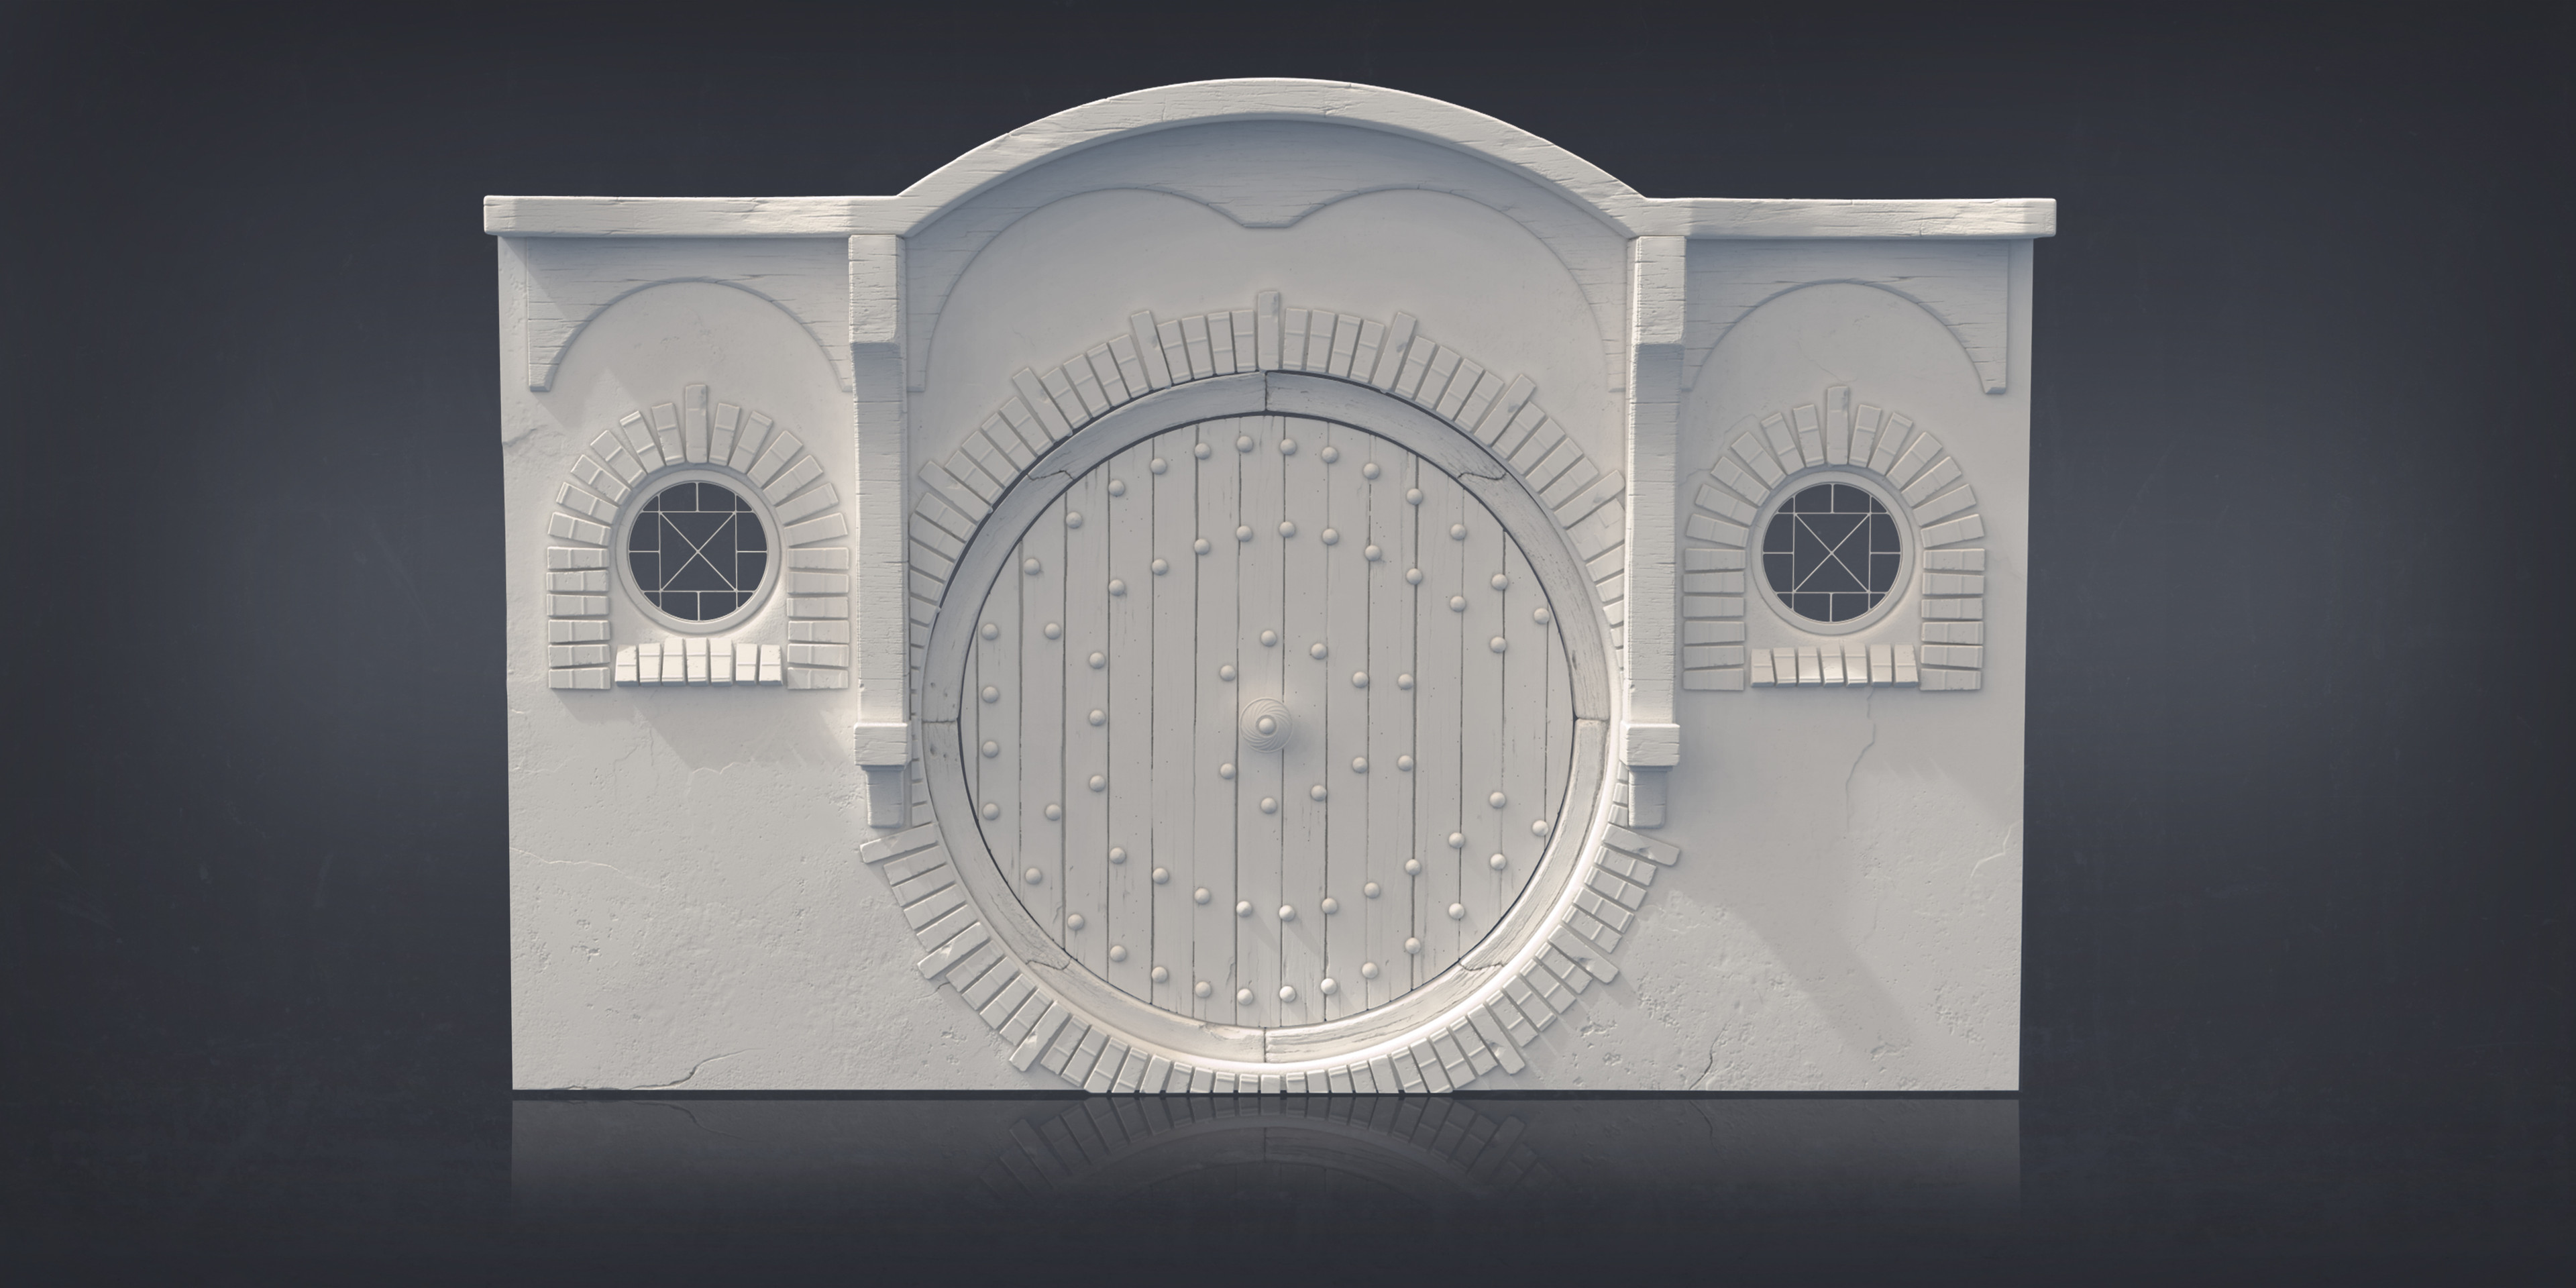 Hobbit door sculpt, just for fun. Had the idea to do a full scene but other projects took my interest. 